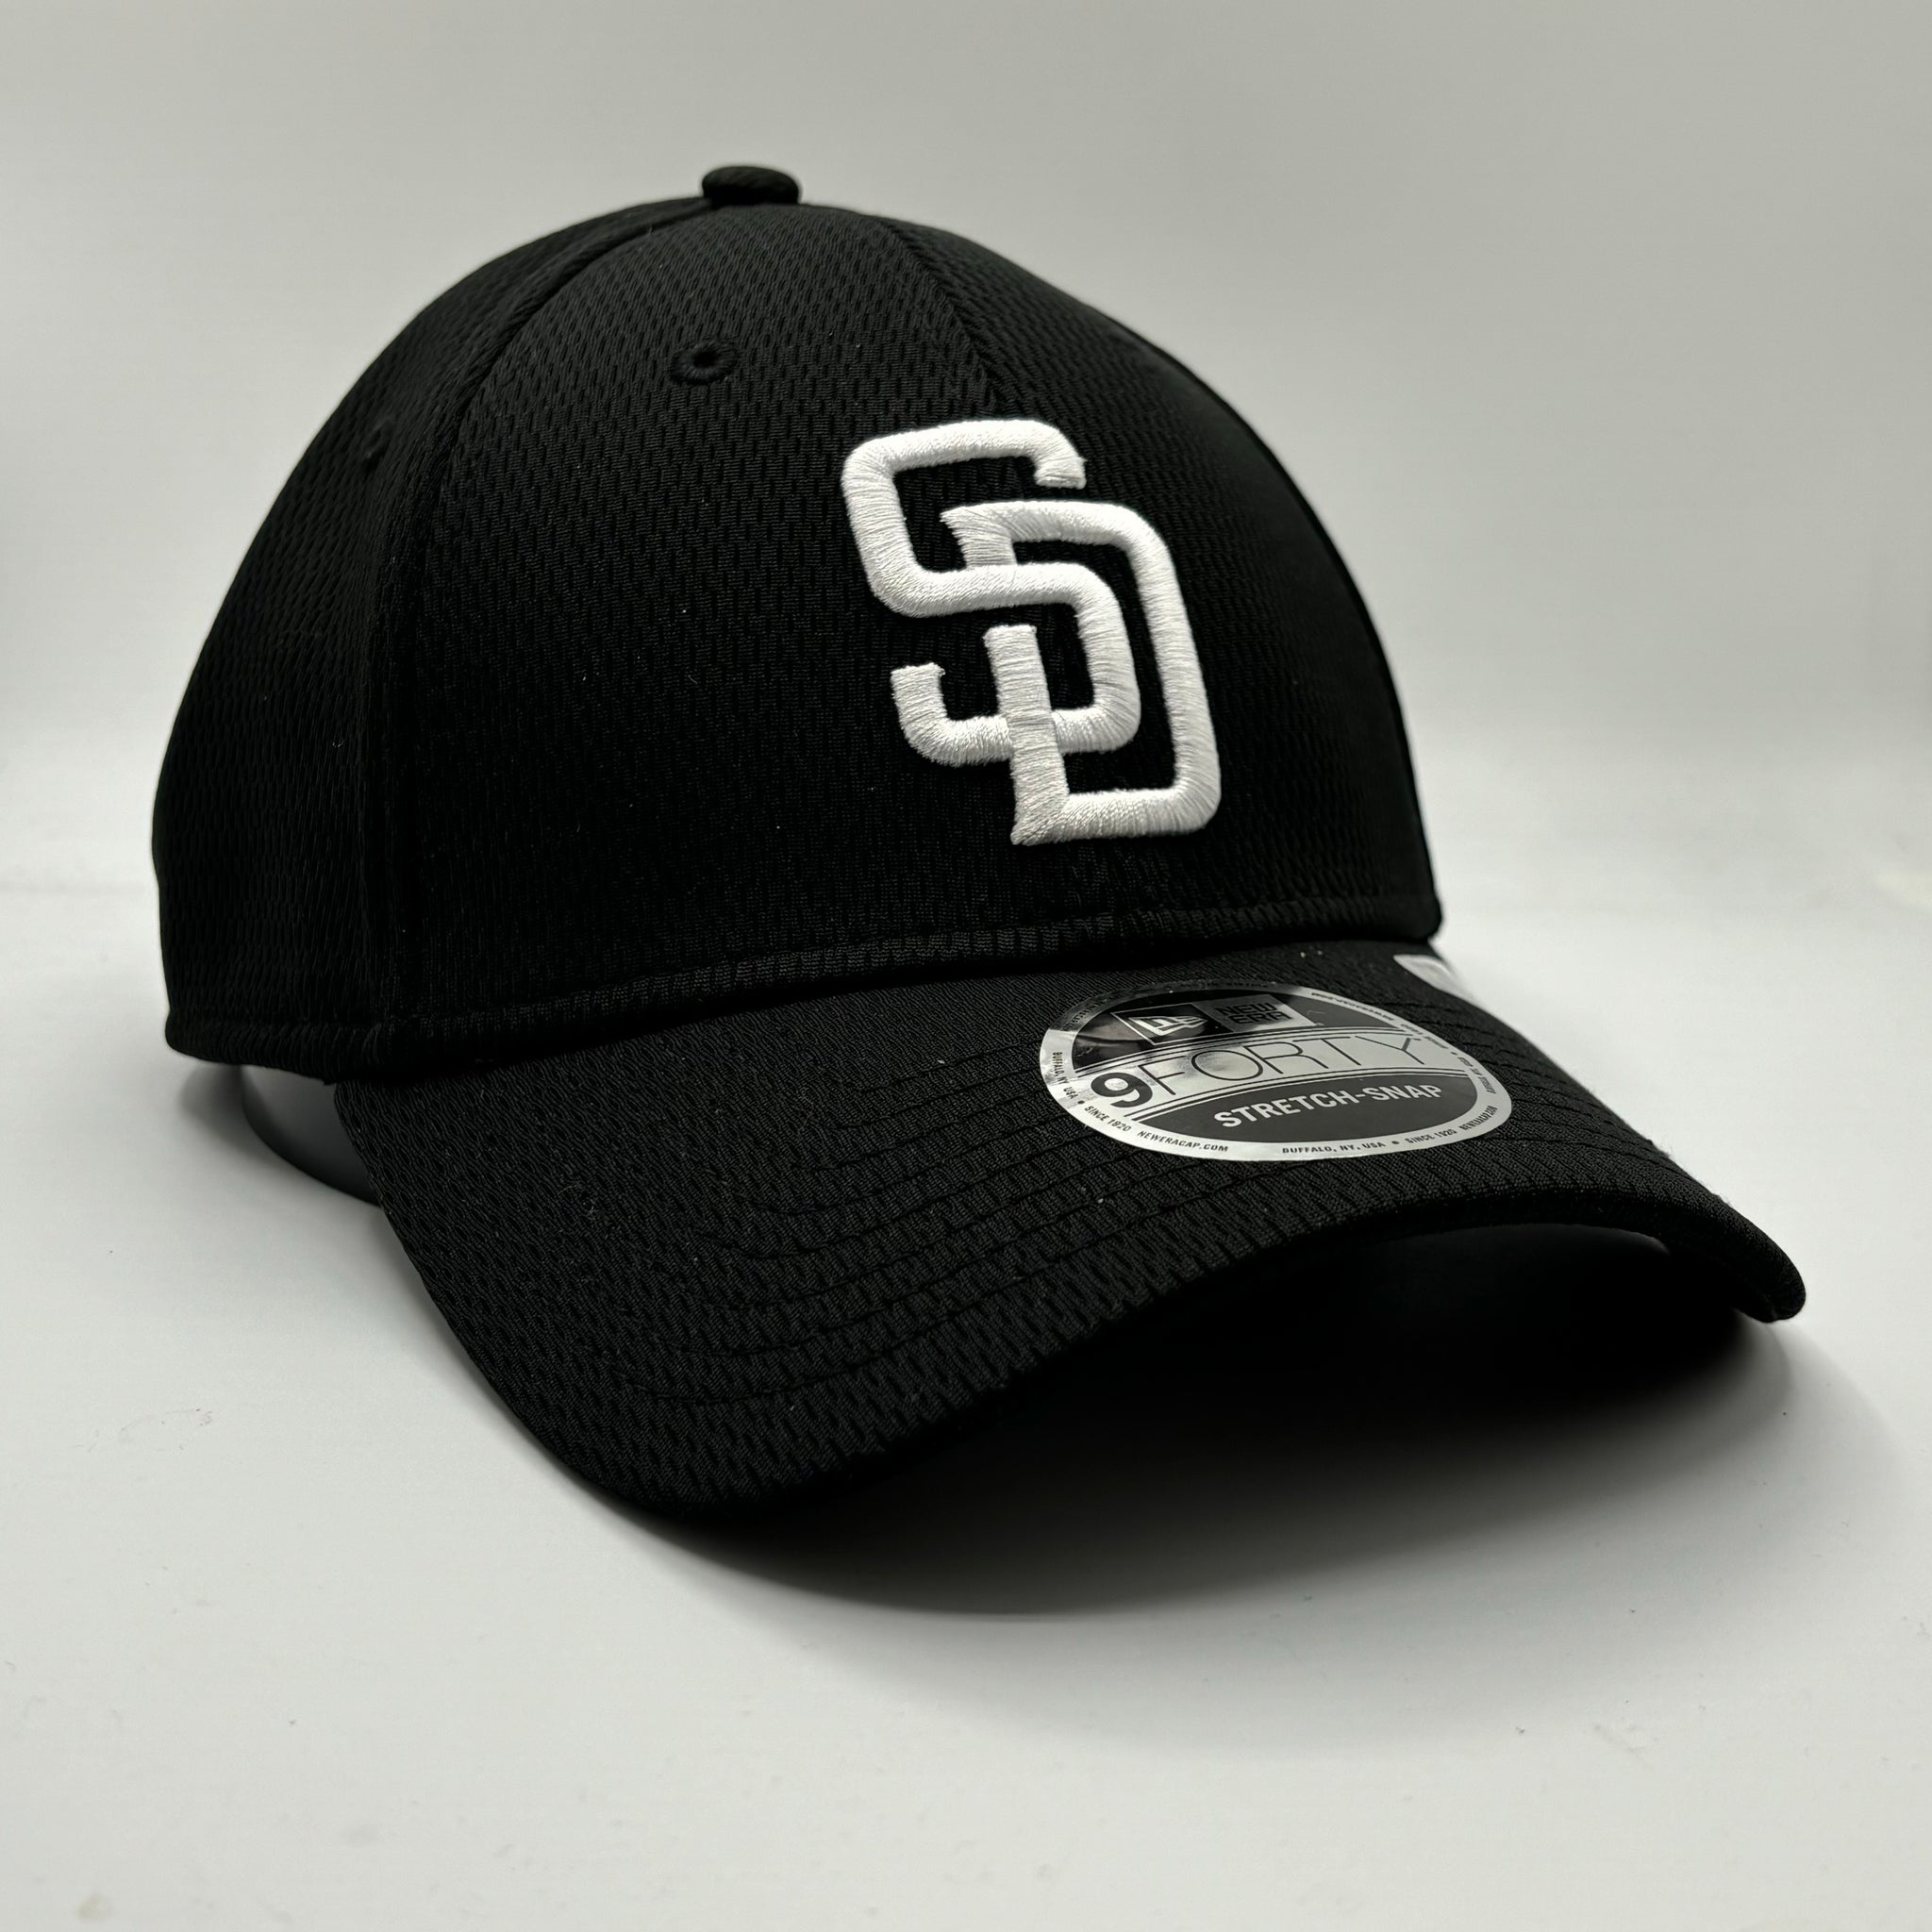 San Diego Padres New Era 9FORTY Black and White Snapback Hat